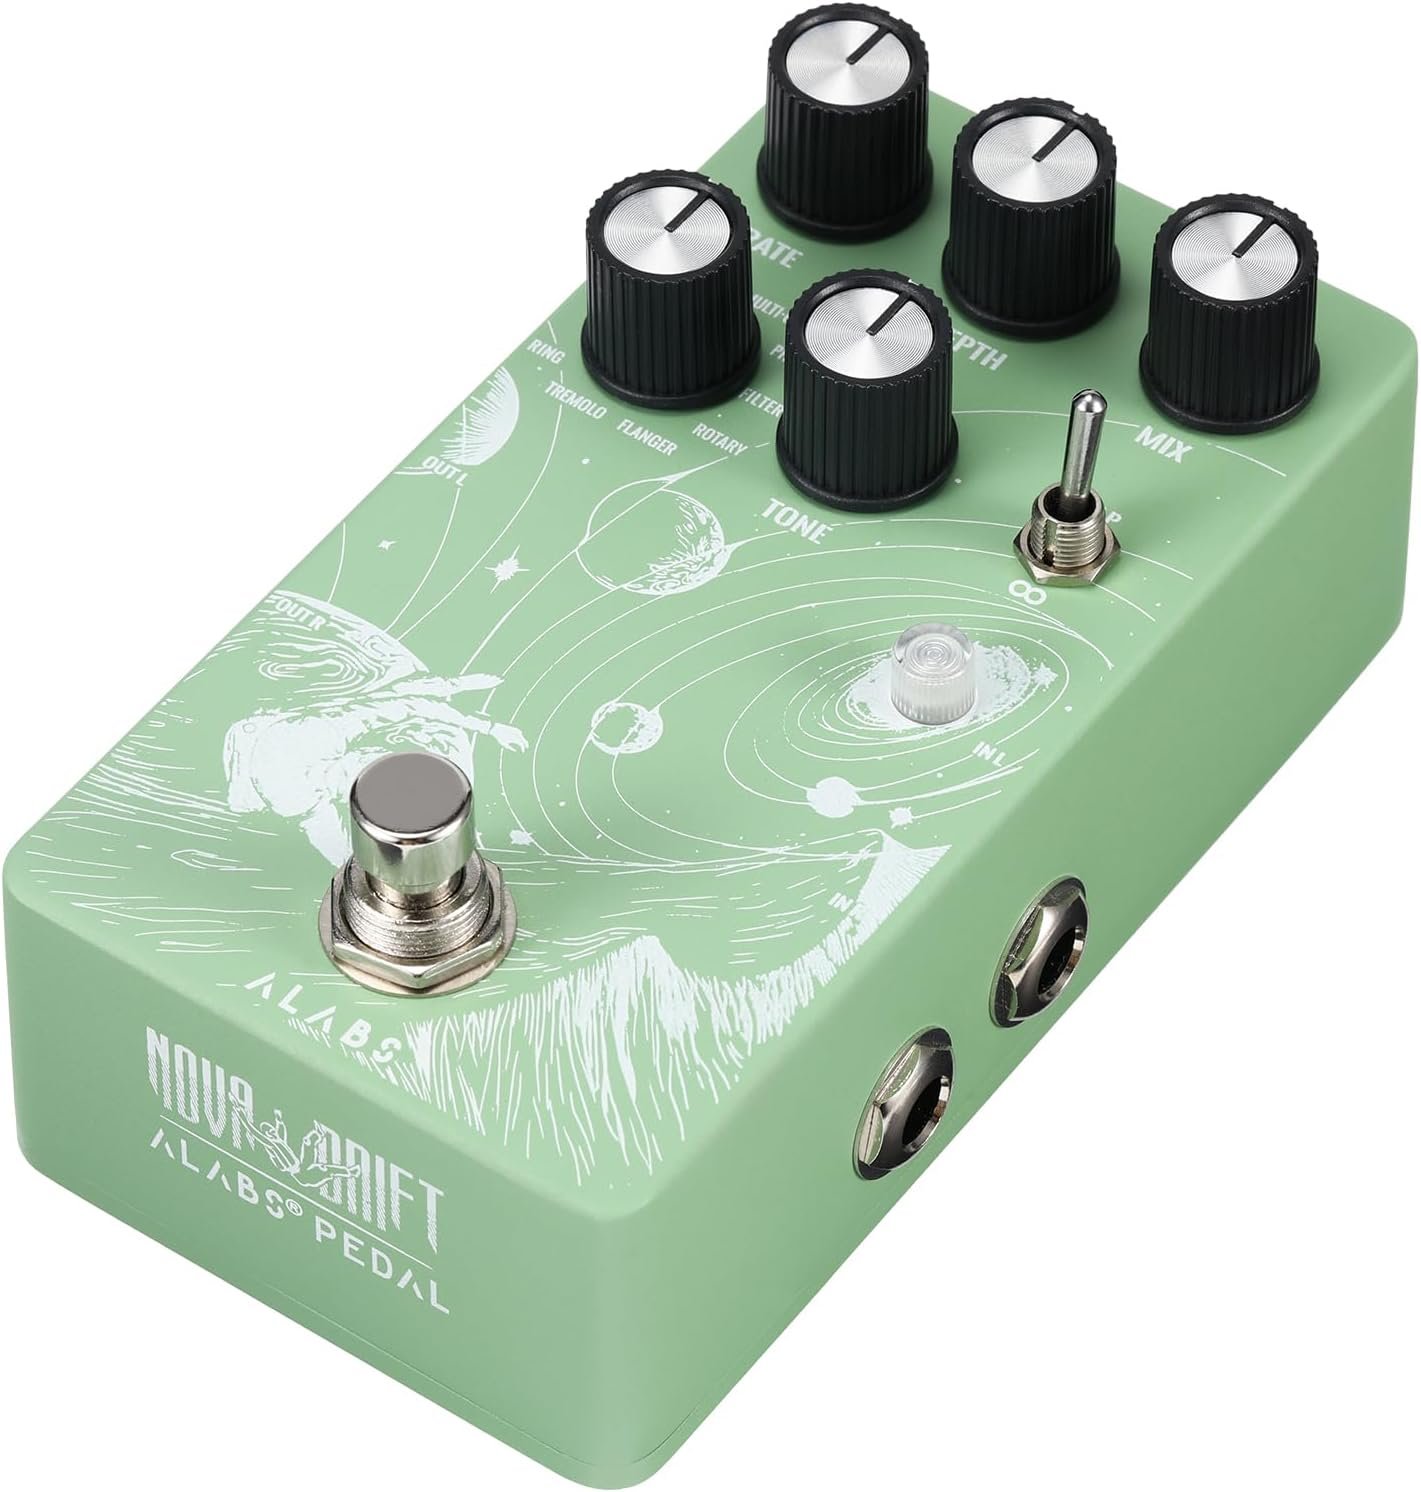 NOVADRIFT Modulation Pedals for Electric Guitar, with 9 Stereo Mod Effects,Vibe Chorus Phaser Rotary Flanger Tremolo Ring, Analog Dry Through,Tap Tempo,True Bypass,Multi-Expression Control